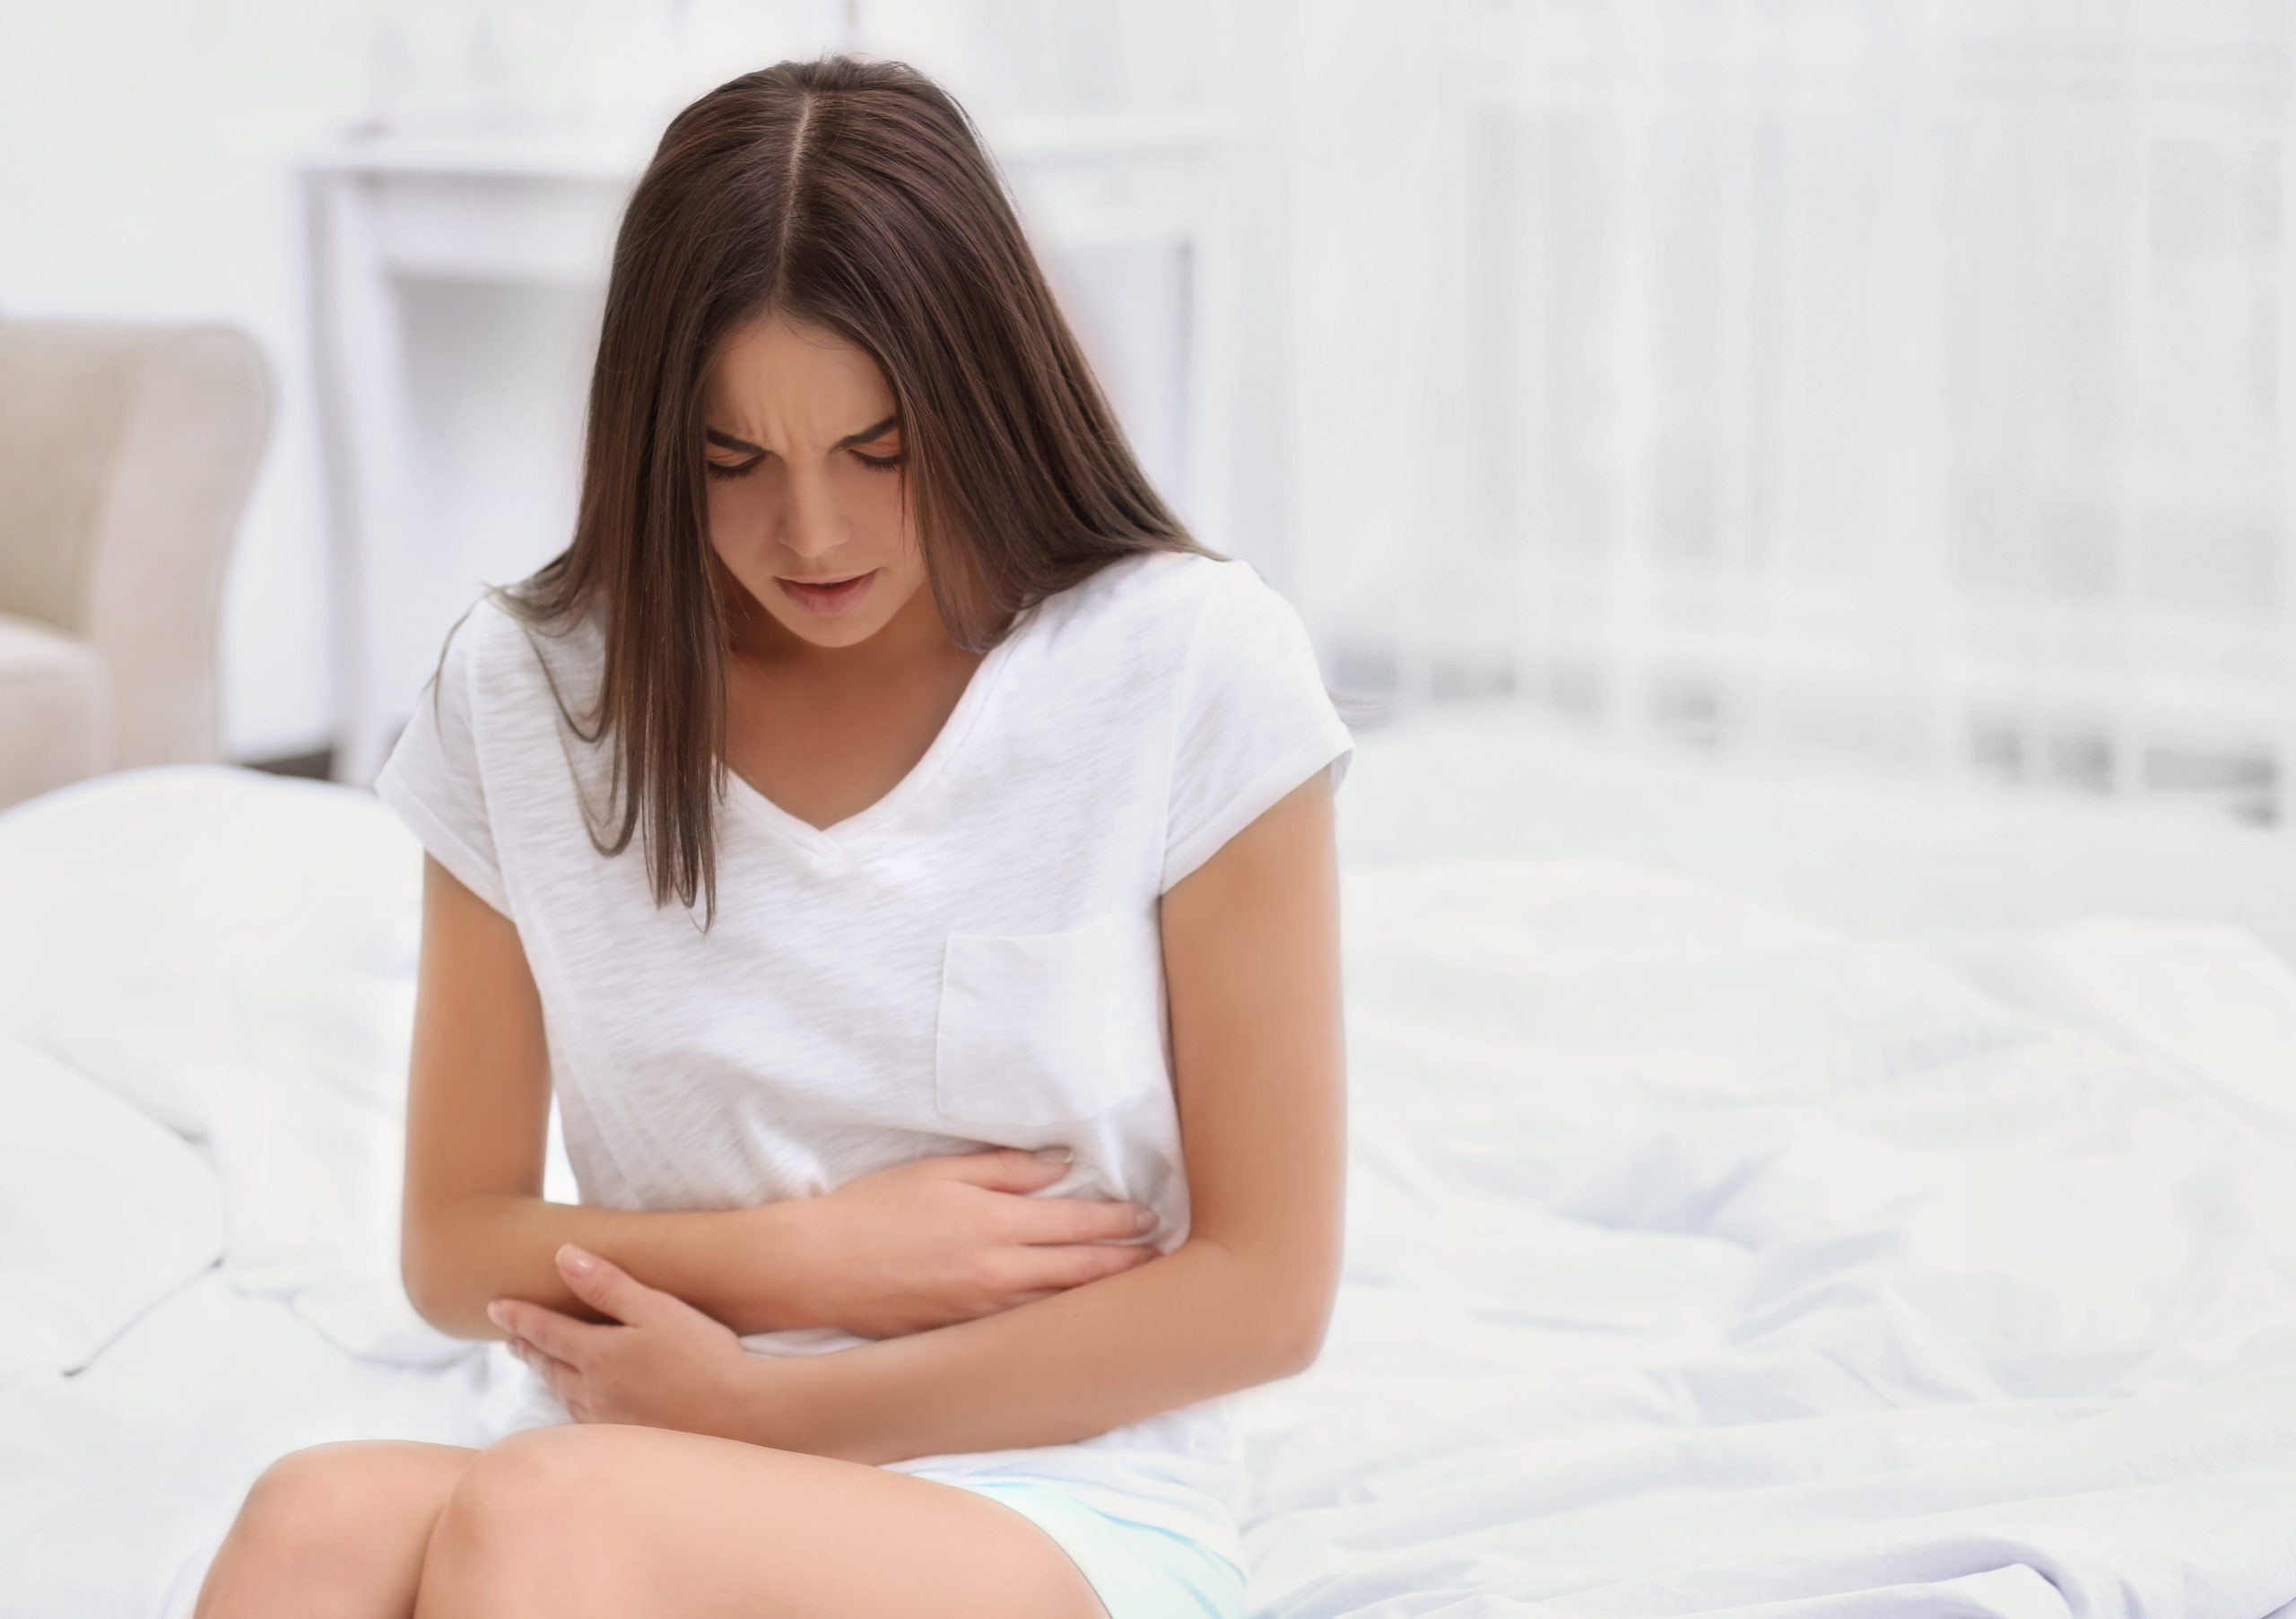 Young woman suffering from abdominal pain due to endometriosis